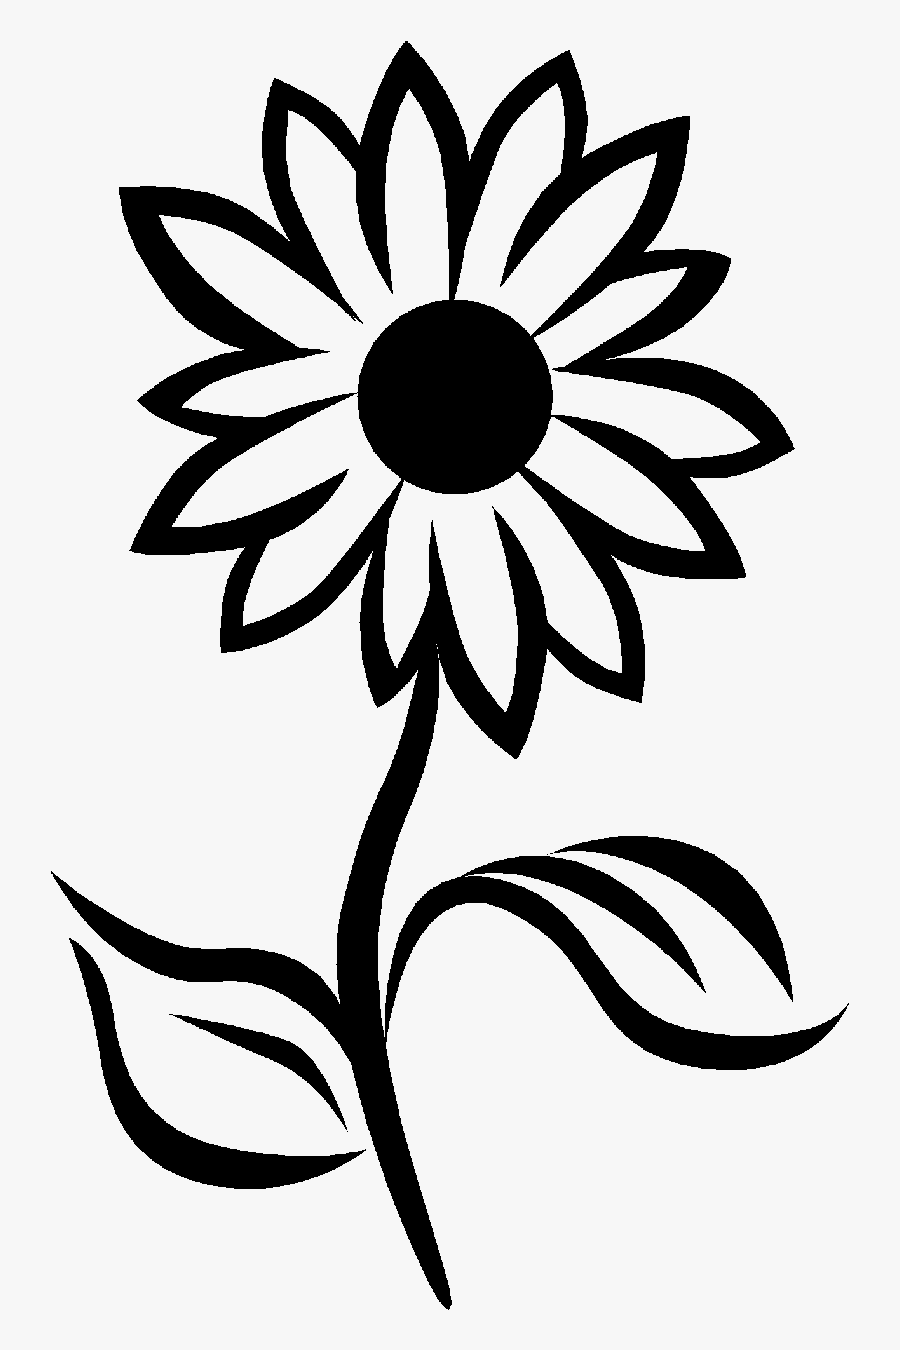 Sun Black And White Clipart Small - Sunflower Black And White, Transparent Clipart